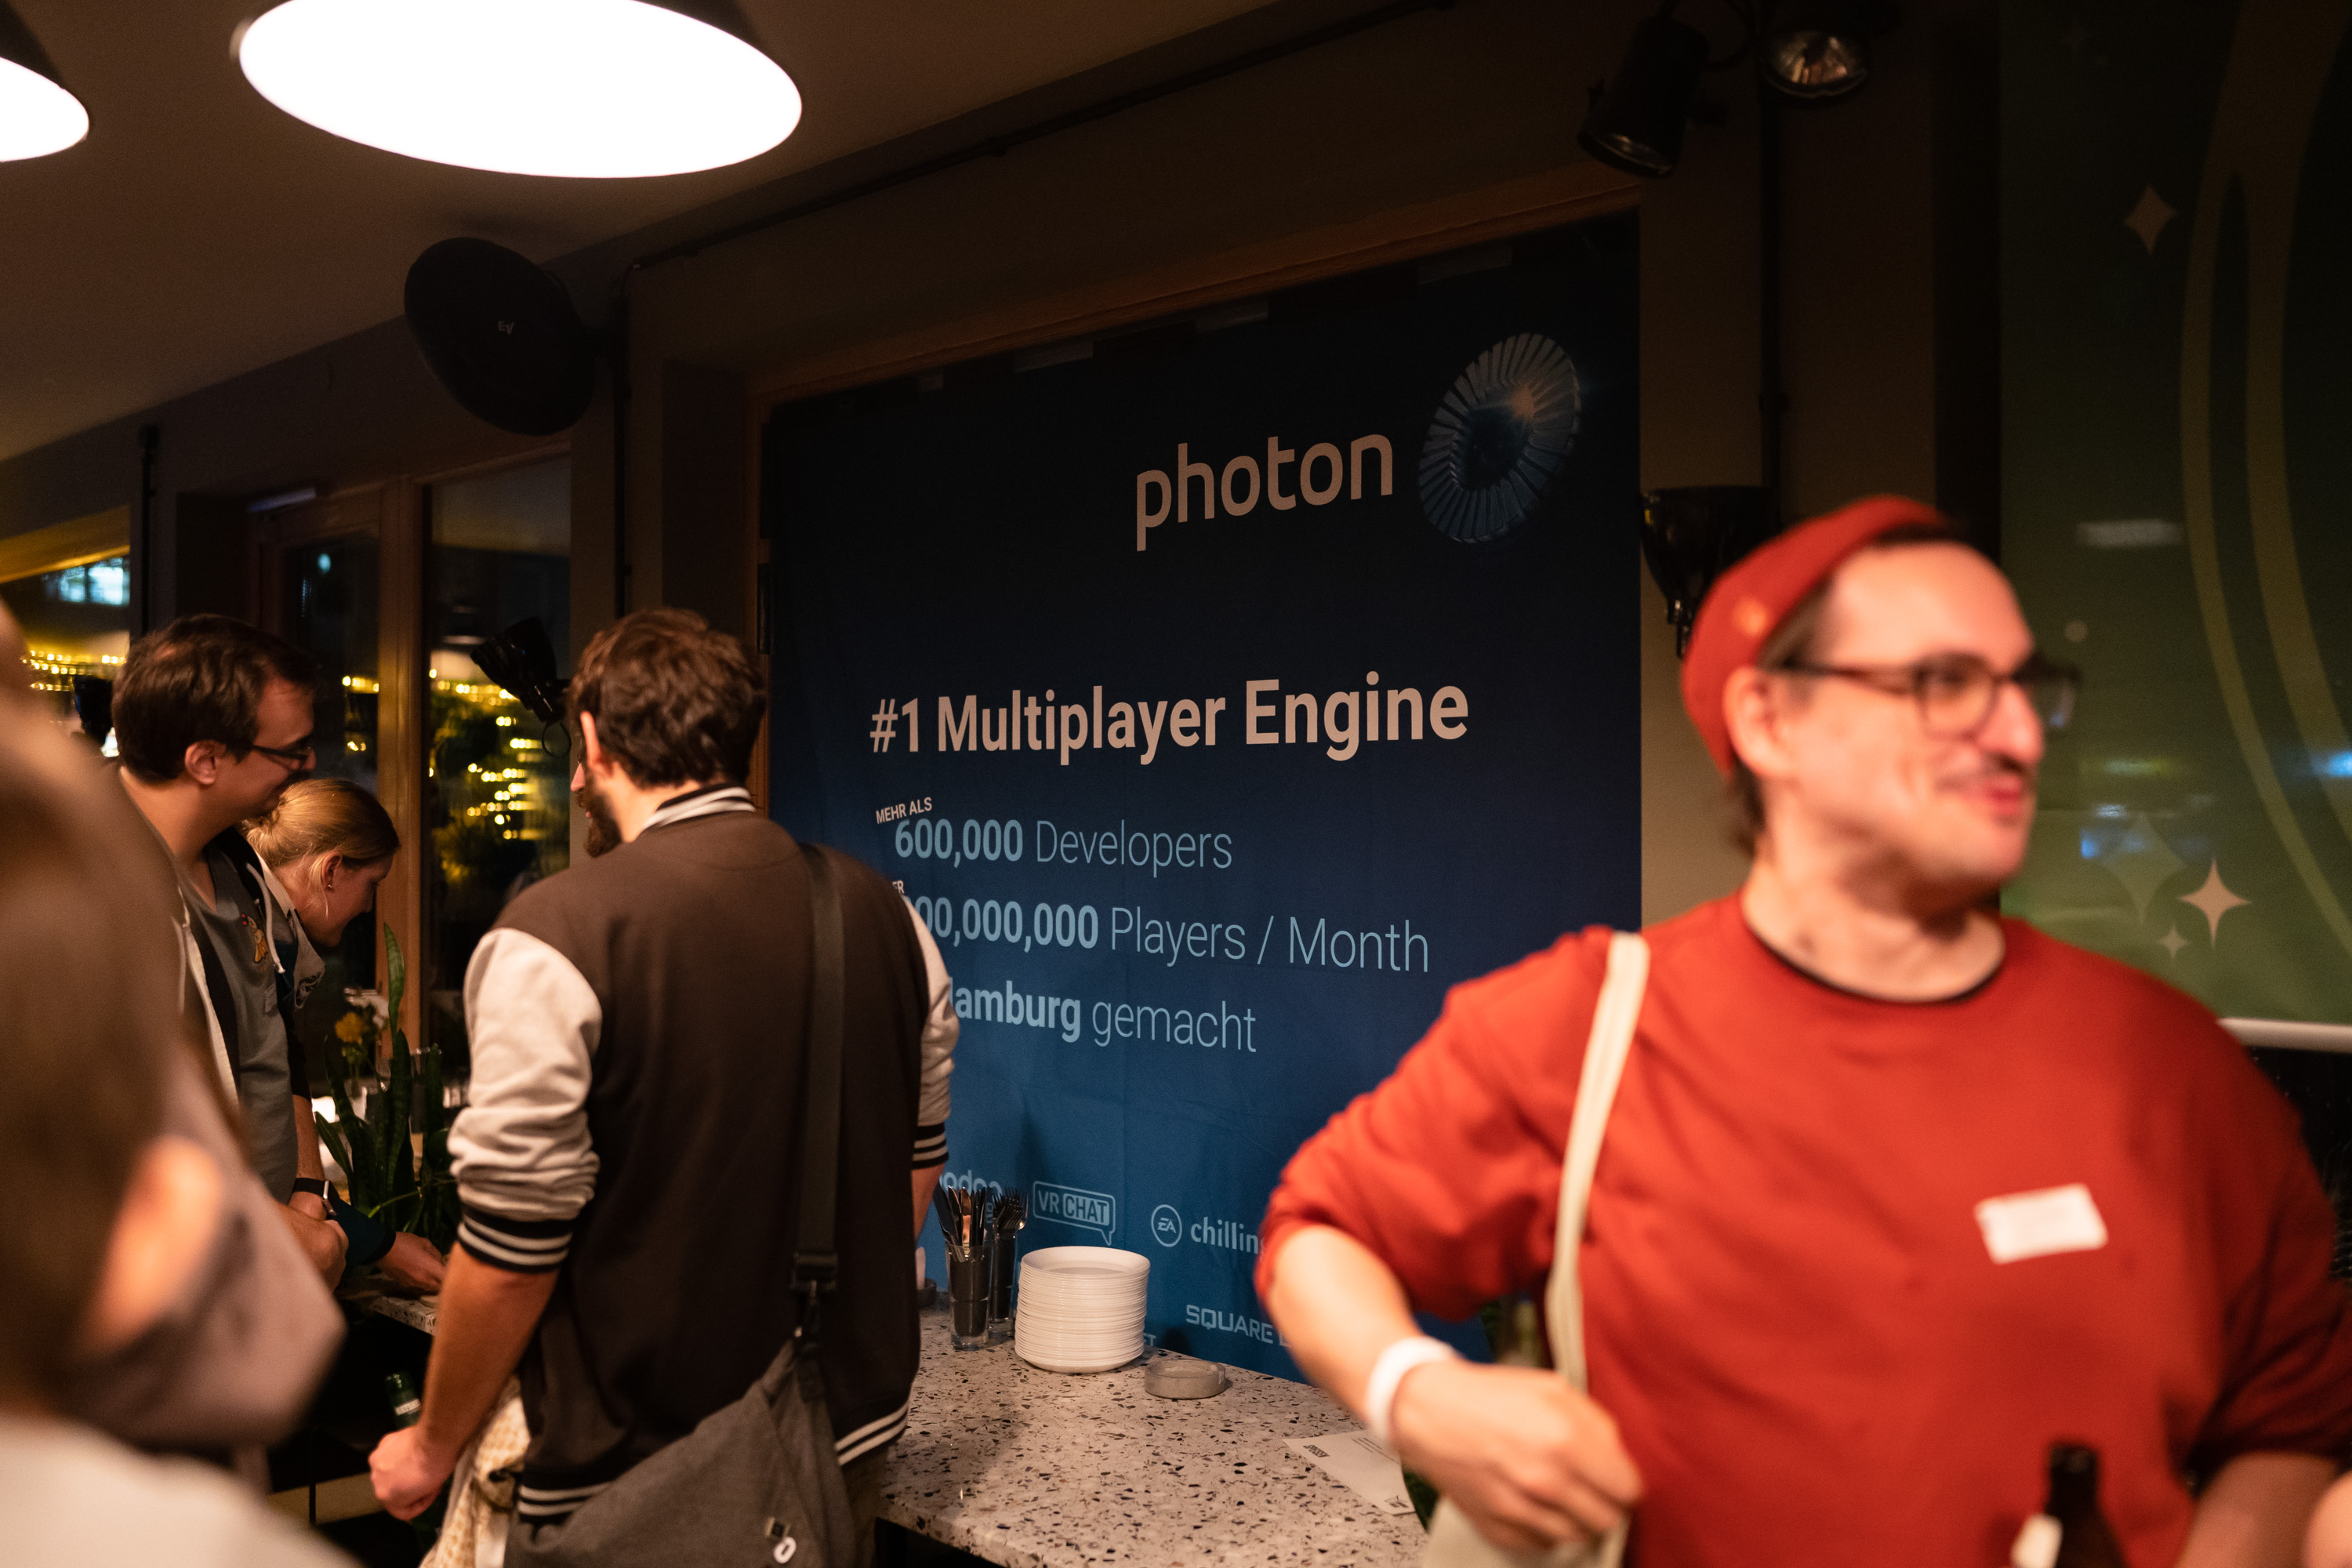 Thanks to Photon for supporting this evening